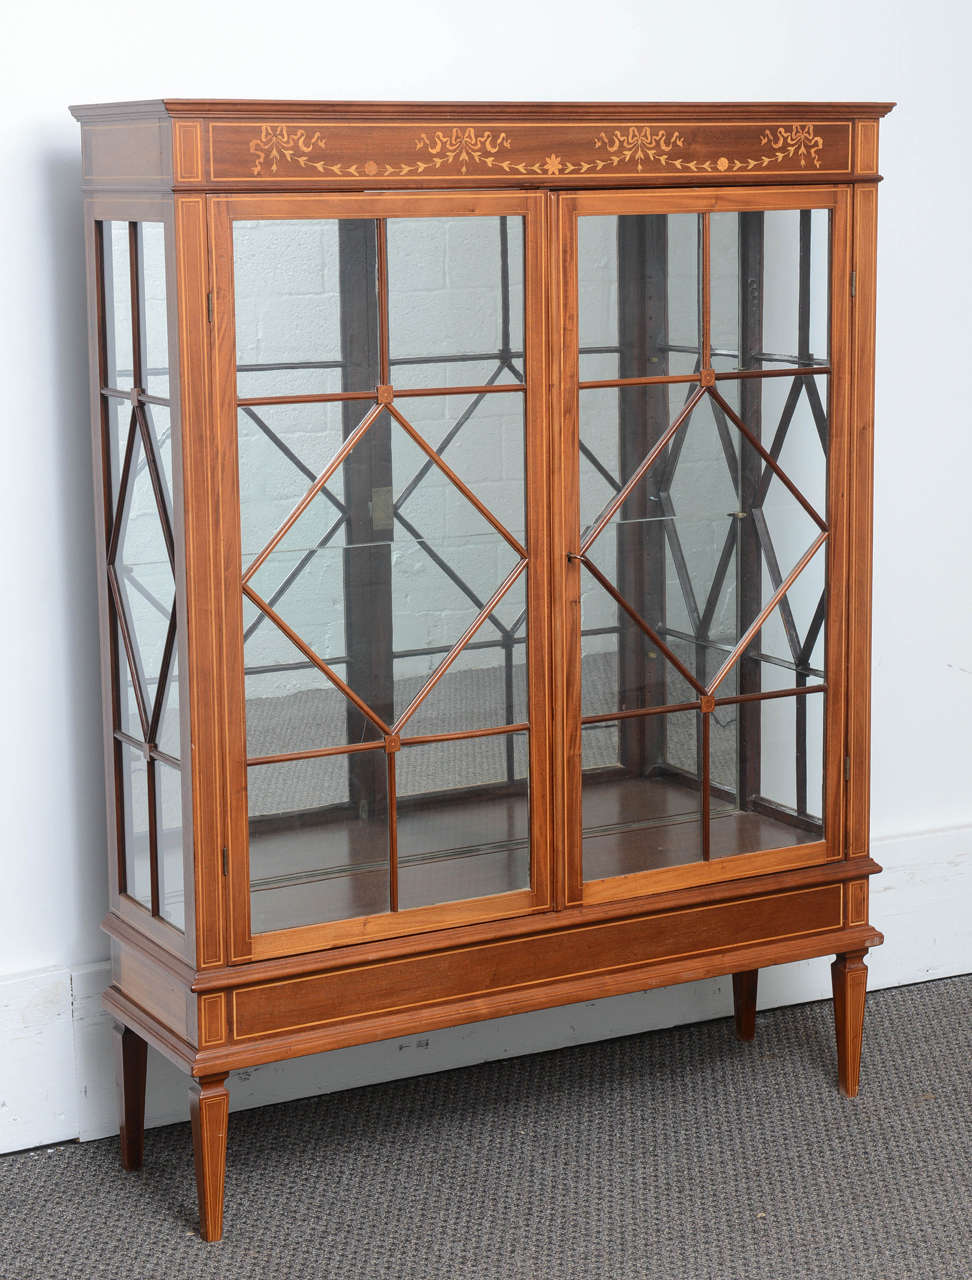 This is a superb solid mahogany display cabinet made in England, circa 1890.
There are two glass doors with wood beading to the front, it smothered in satinwood marquetry inlay and in excellent condition.
It sits on square tapered legs to either